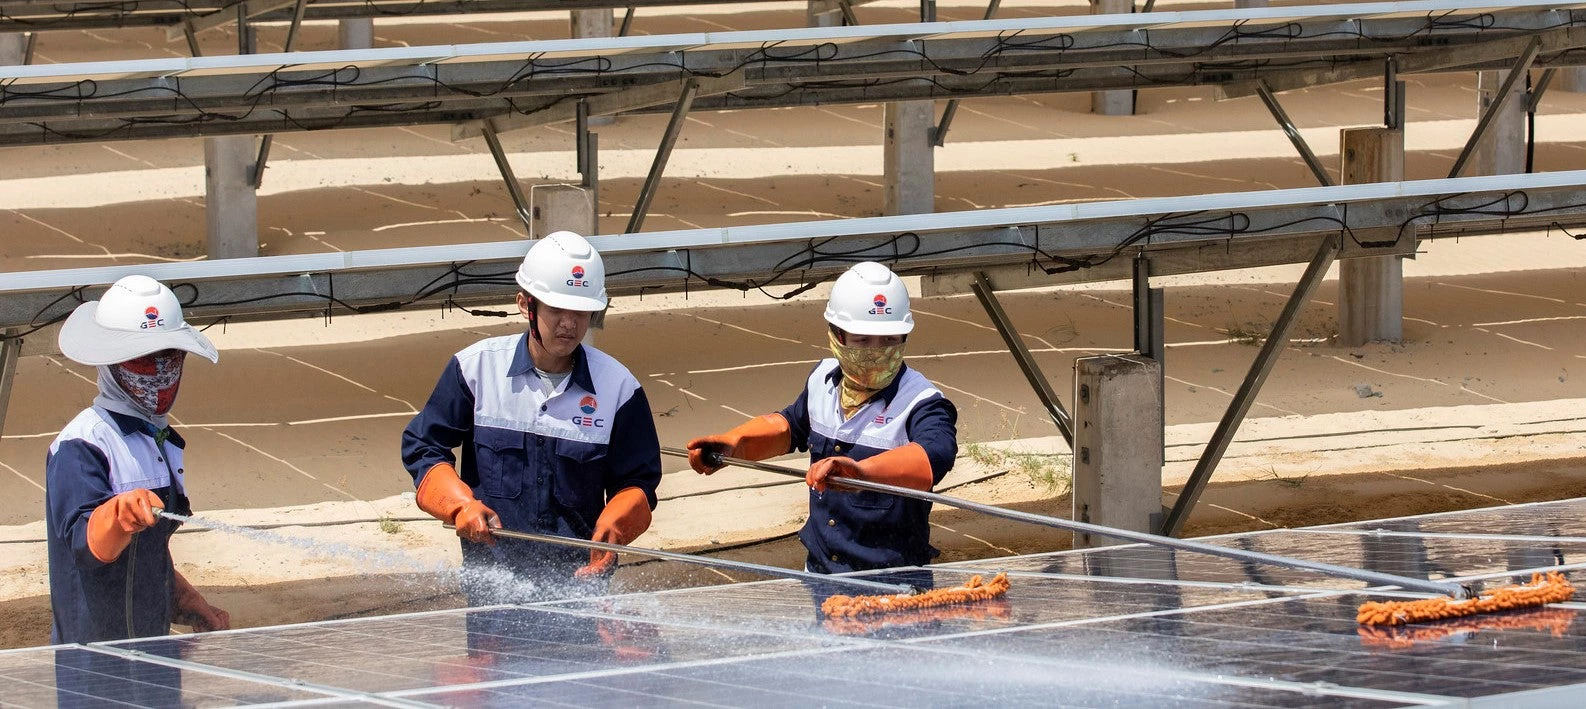 Workers maintain 145,560 solar panels that spread across 45 hectares at the Phong Dien solar plant, in Phong Dien District, Thua Thien - Hue Province, Vietnam. Photo @ Dominic Chavez/International Finance Corporation